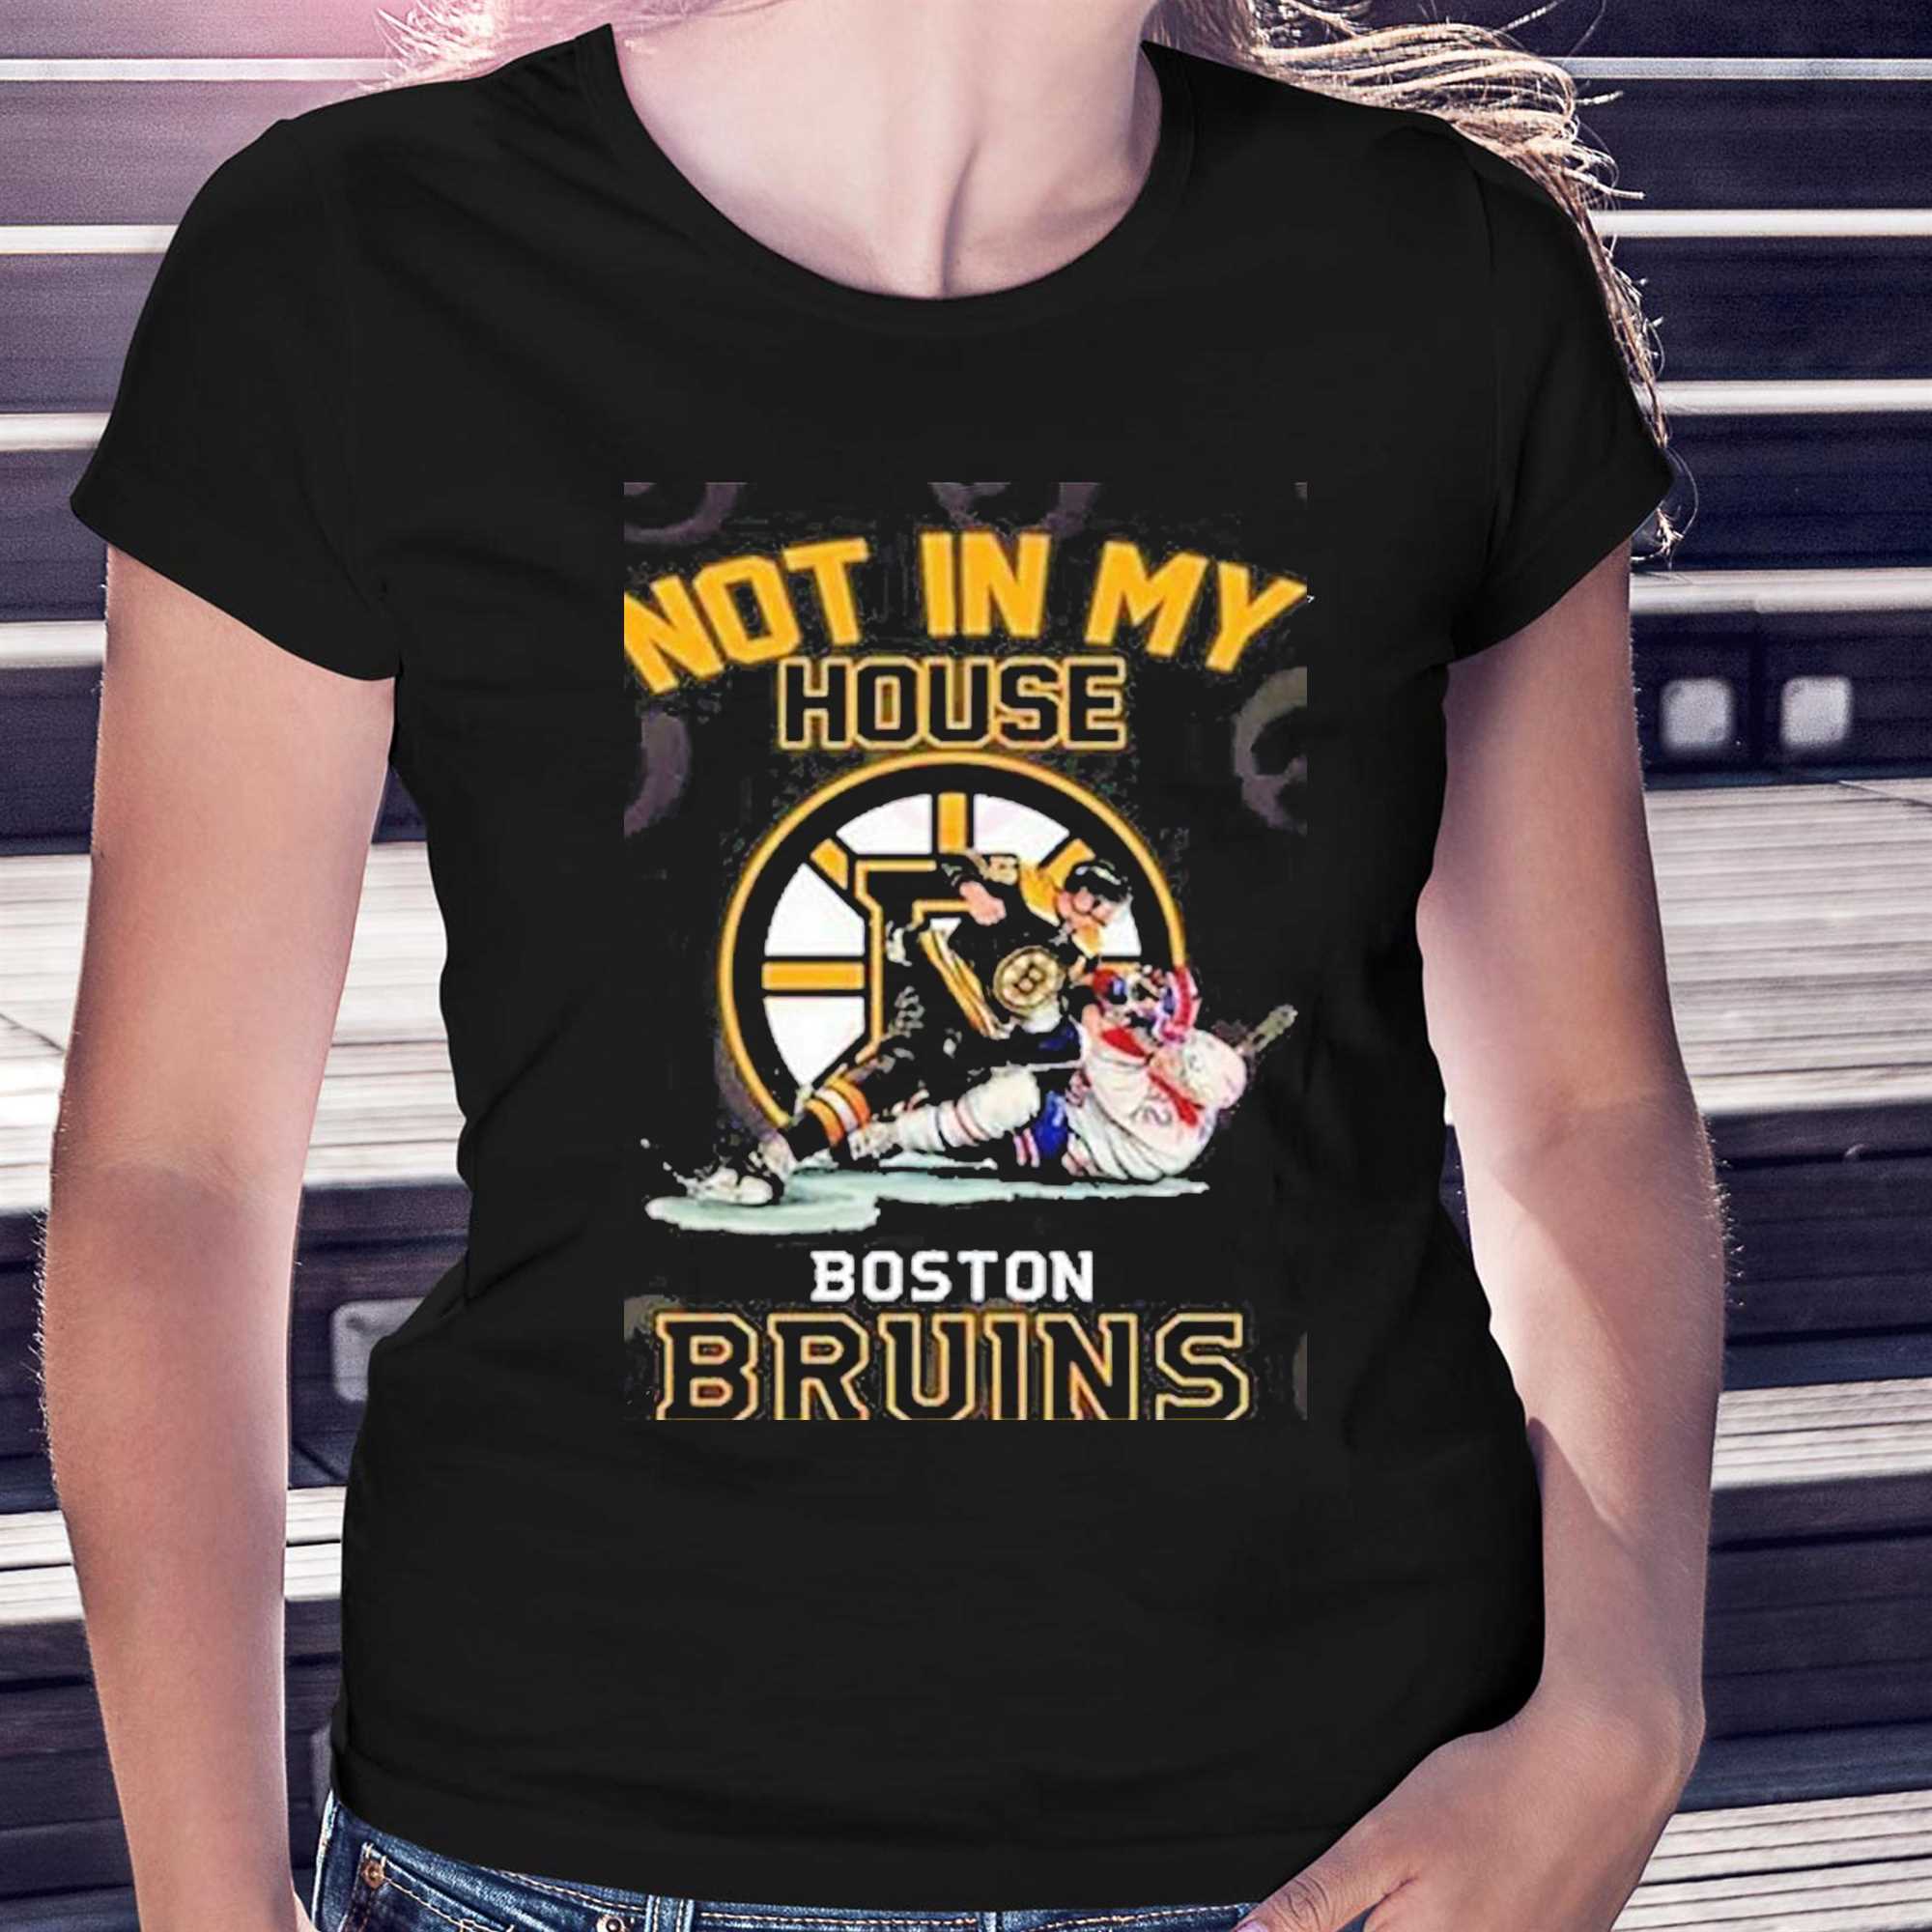 Not in My House T-Shirts